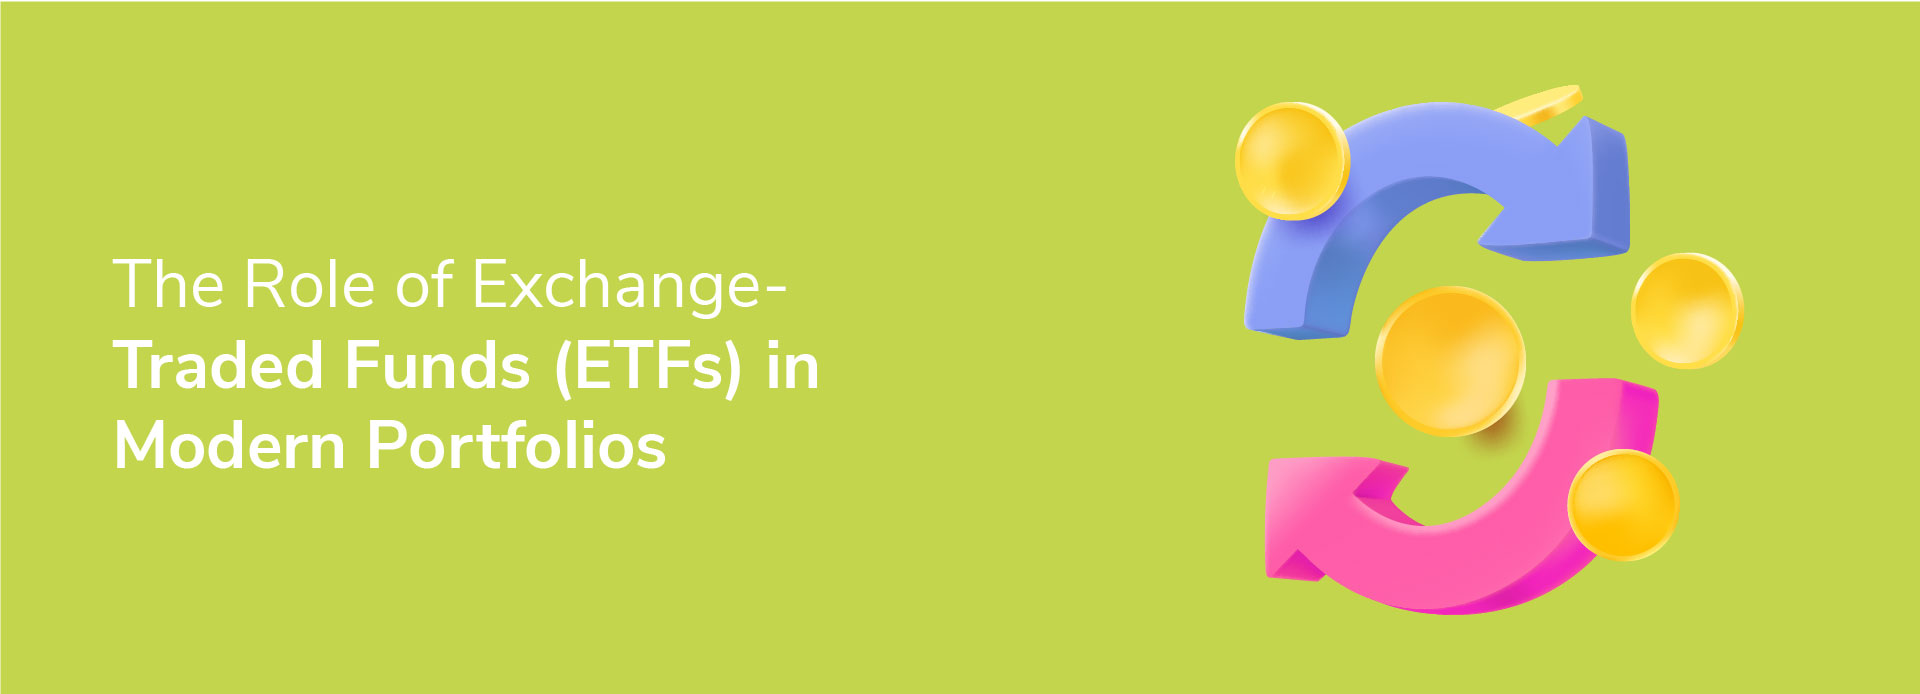 The Role of Exchange-Traded Funds (ETFs) in Modern Portfolios 